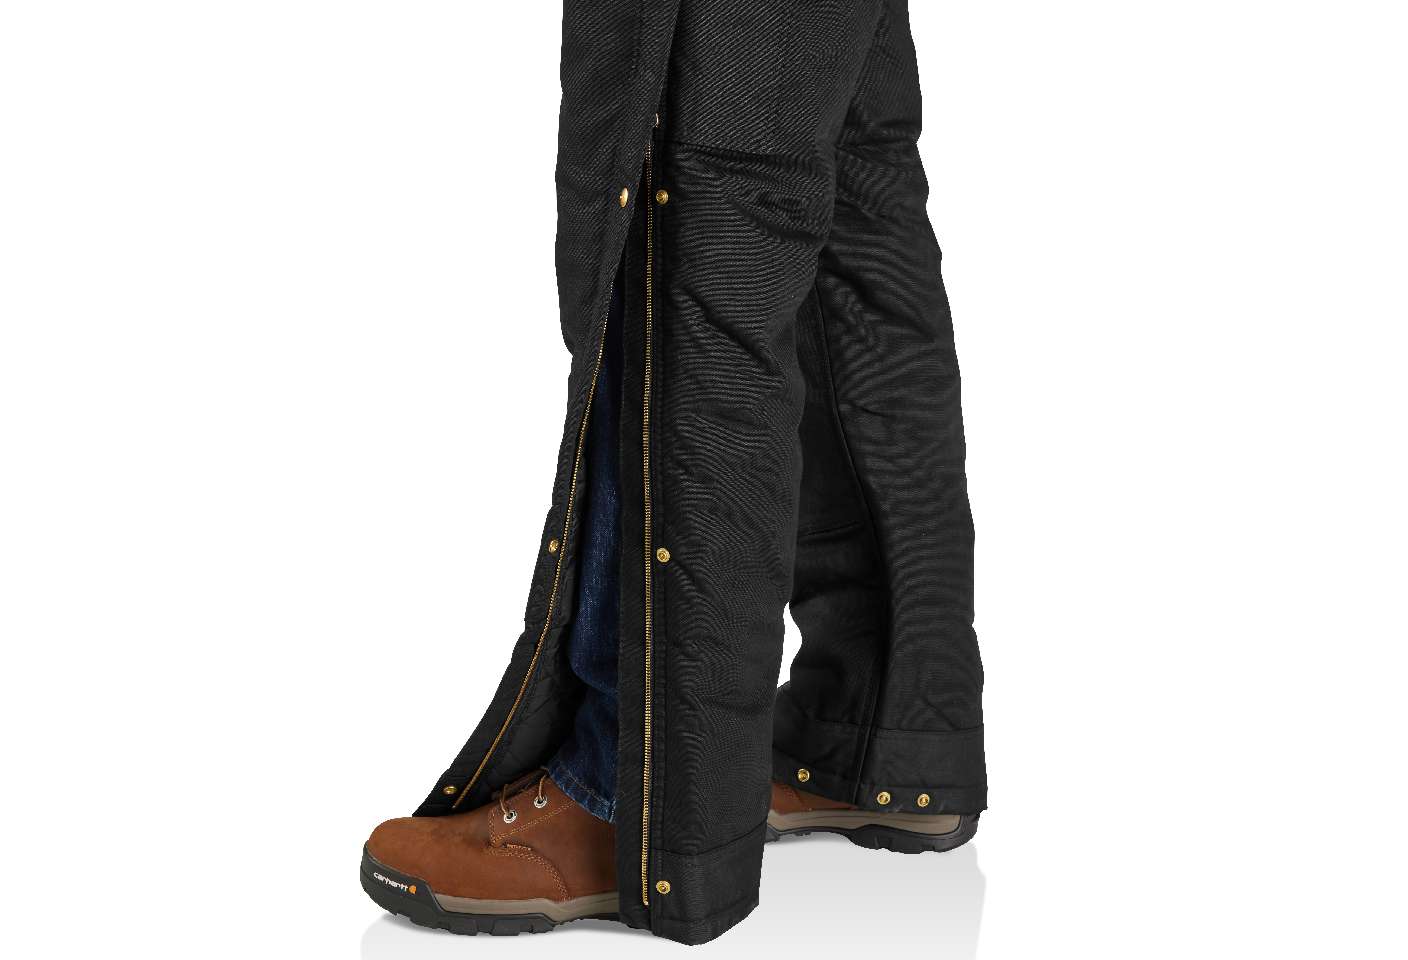 Ankle-to-thigh leg zippers have reinforced storm flaps for weather protection.